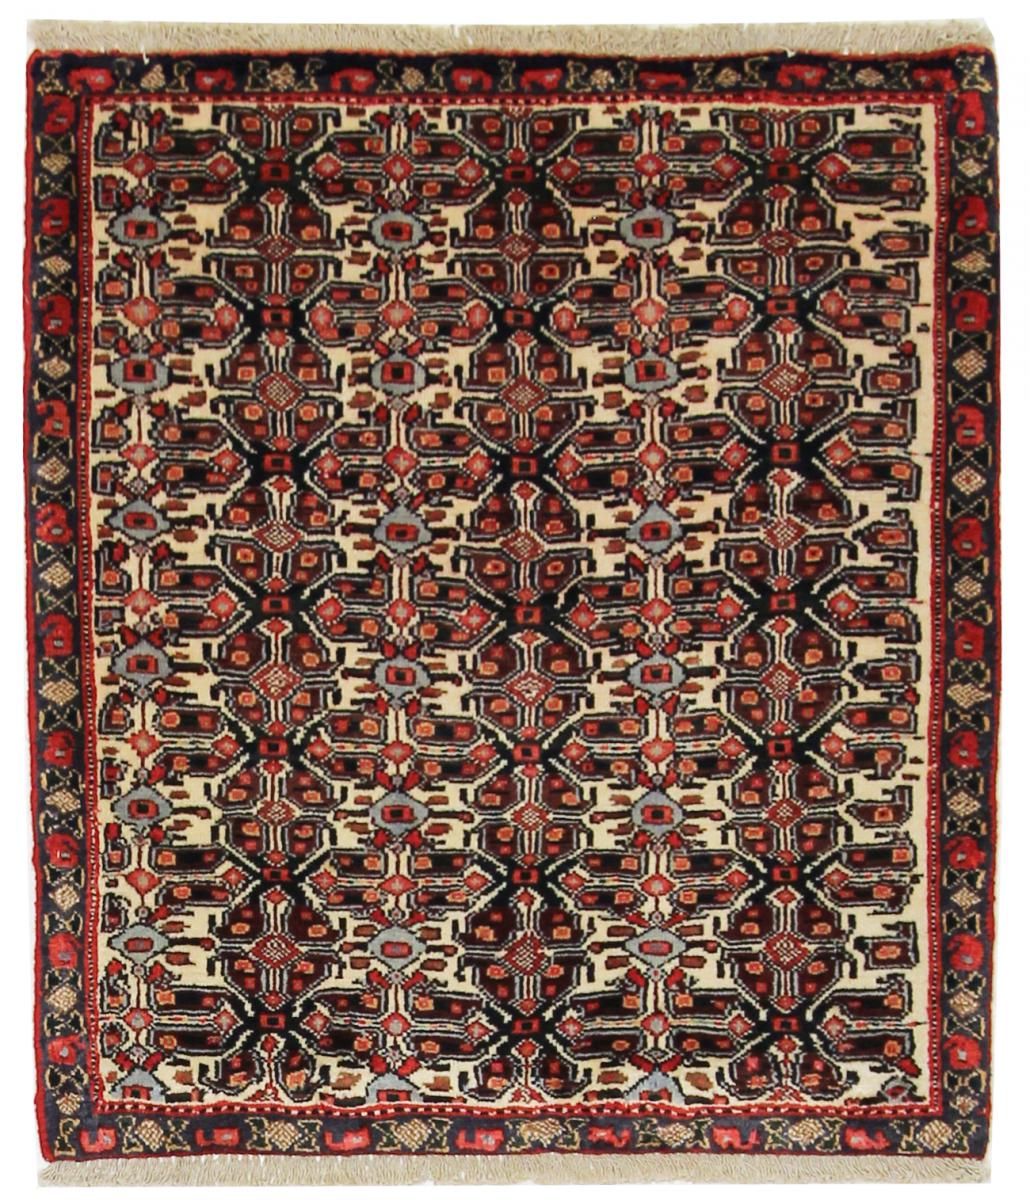 Persian Rug Senneh 2'11"x2'7" 2'11"x2'7", Persian Rug Knotted by hand